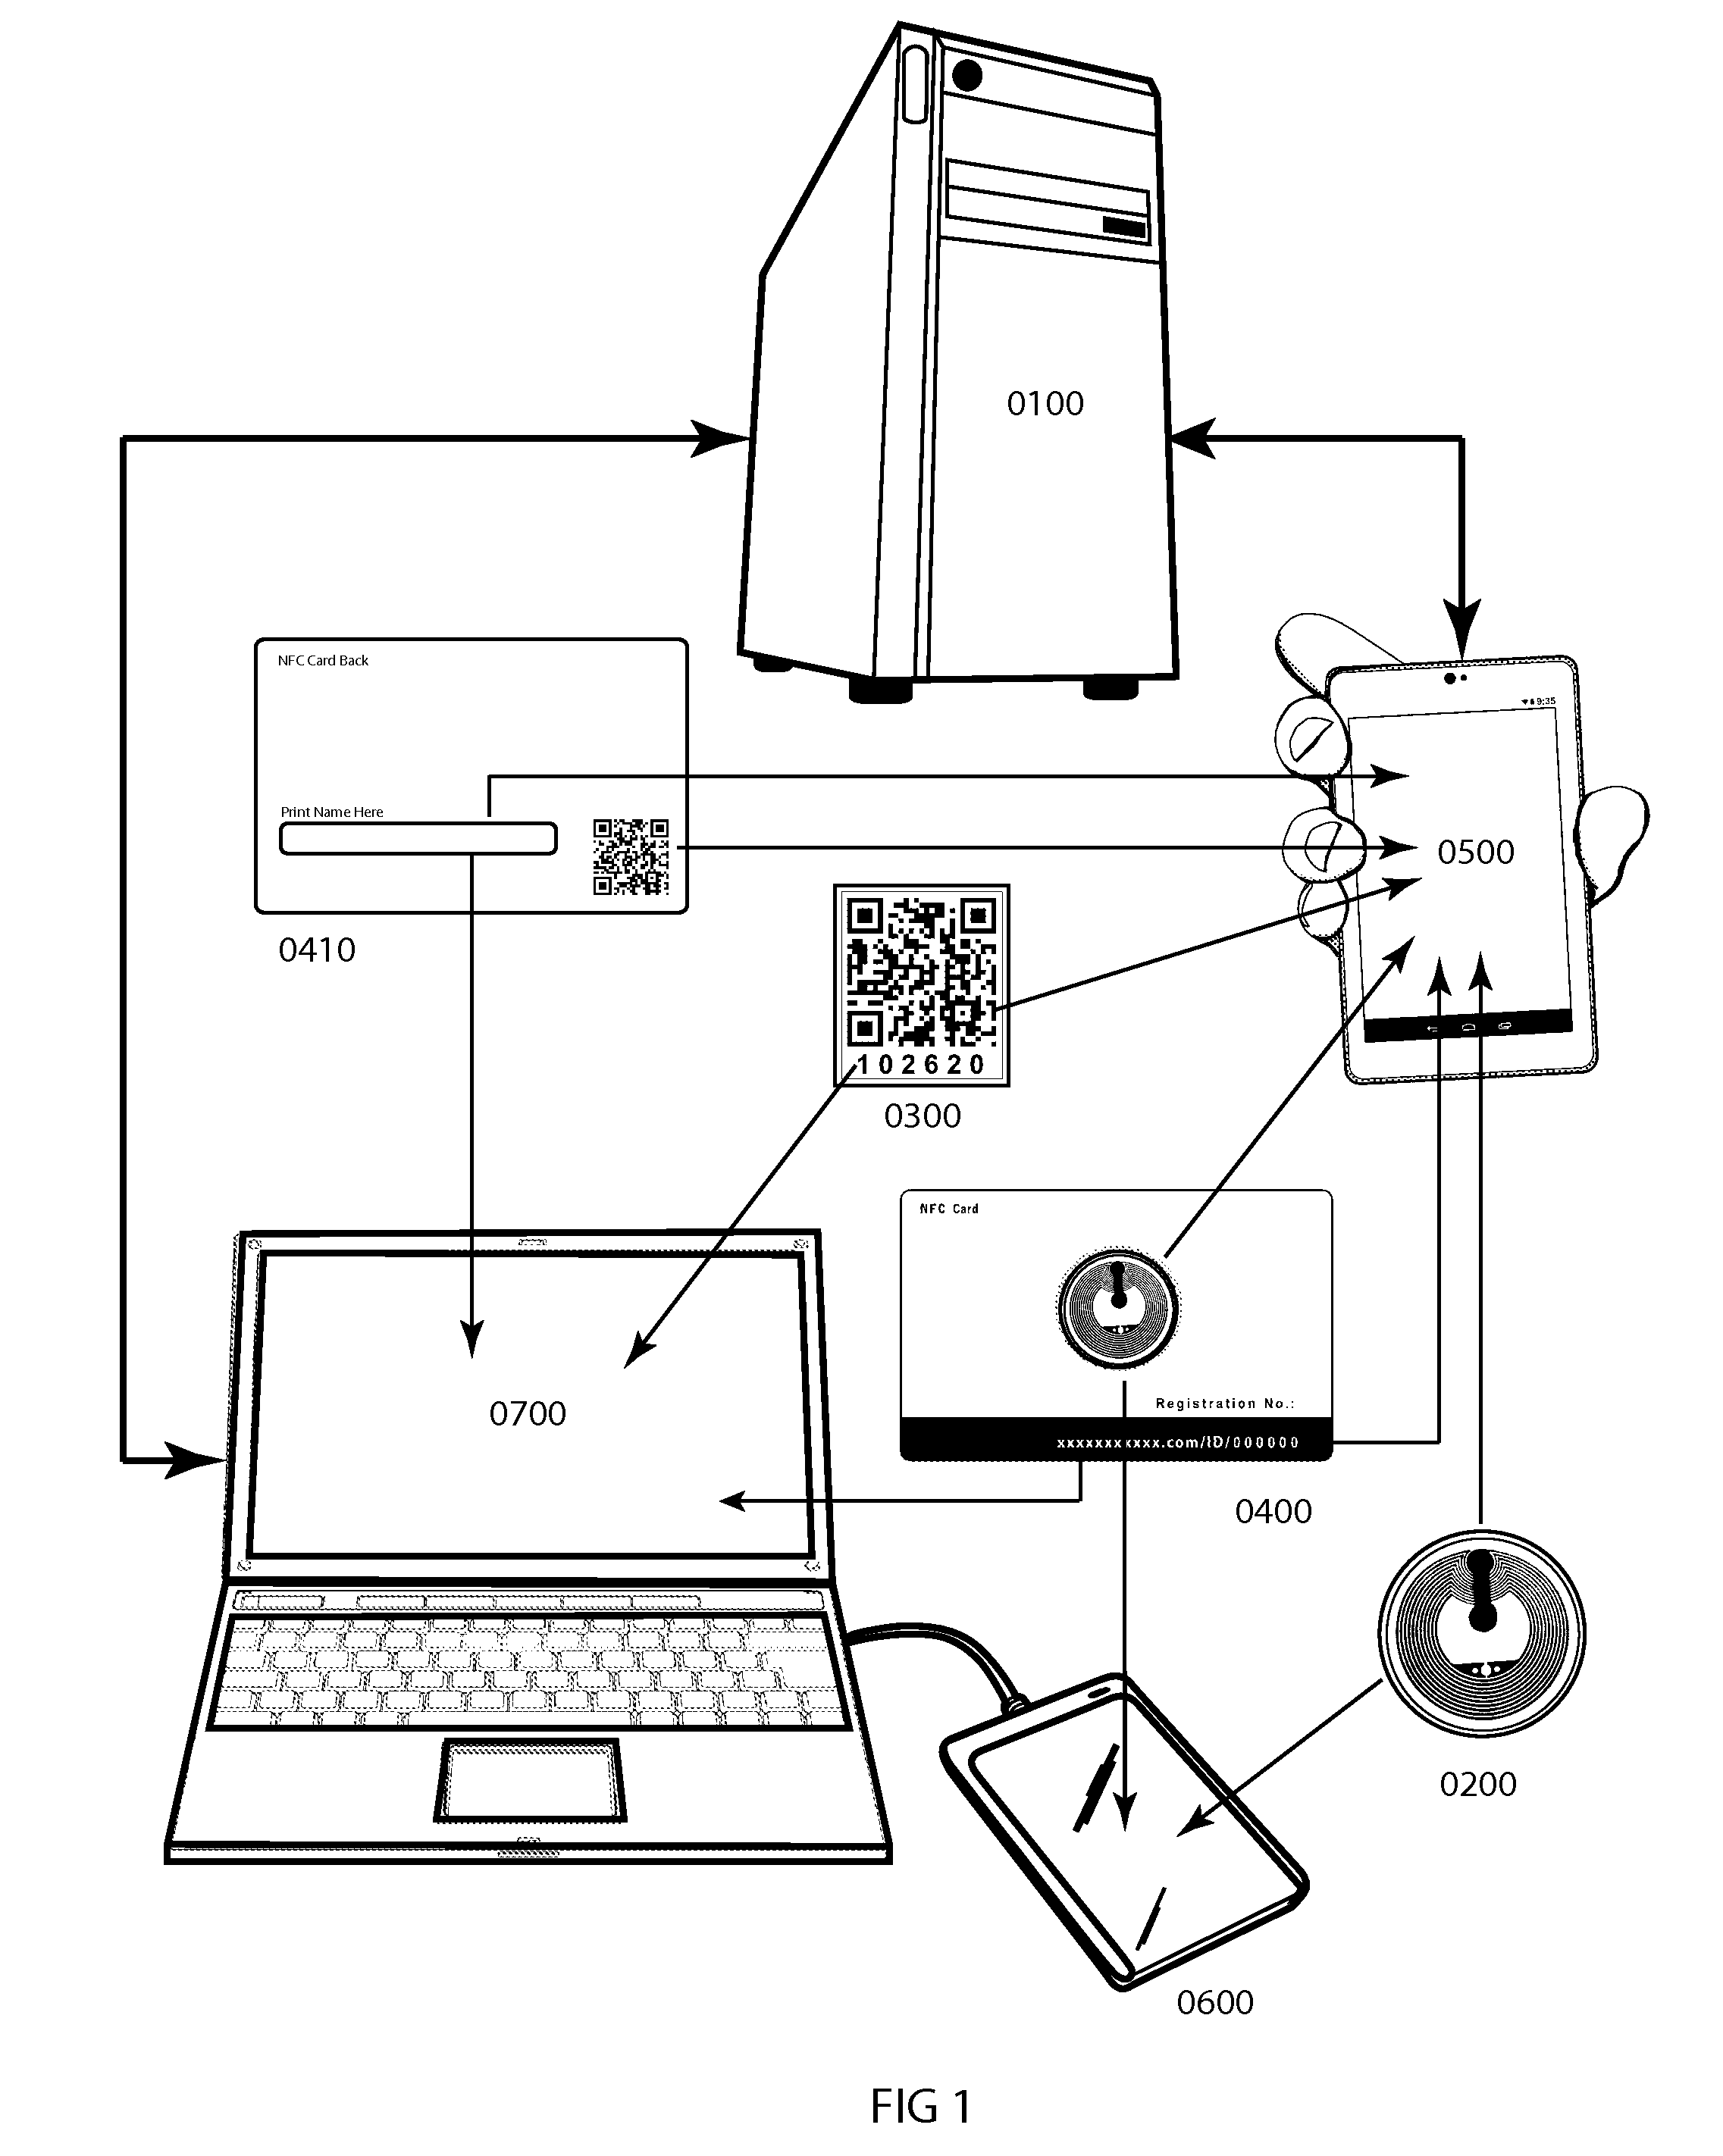 System and Method Employing Near Field Communication and QR Code Technology to Access and Manage Server-Side Personal and Business Property Security Status Accounts